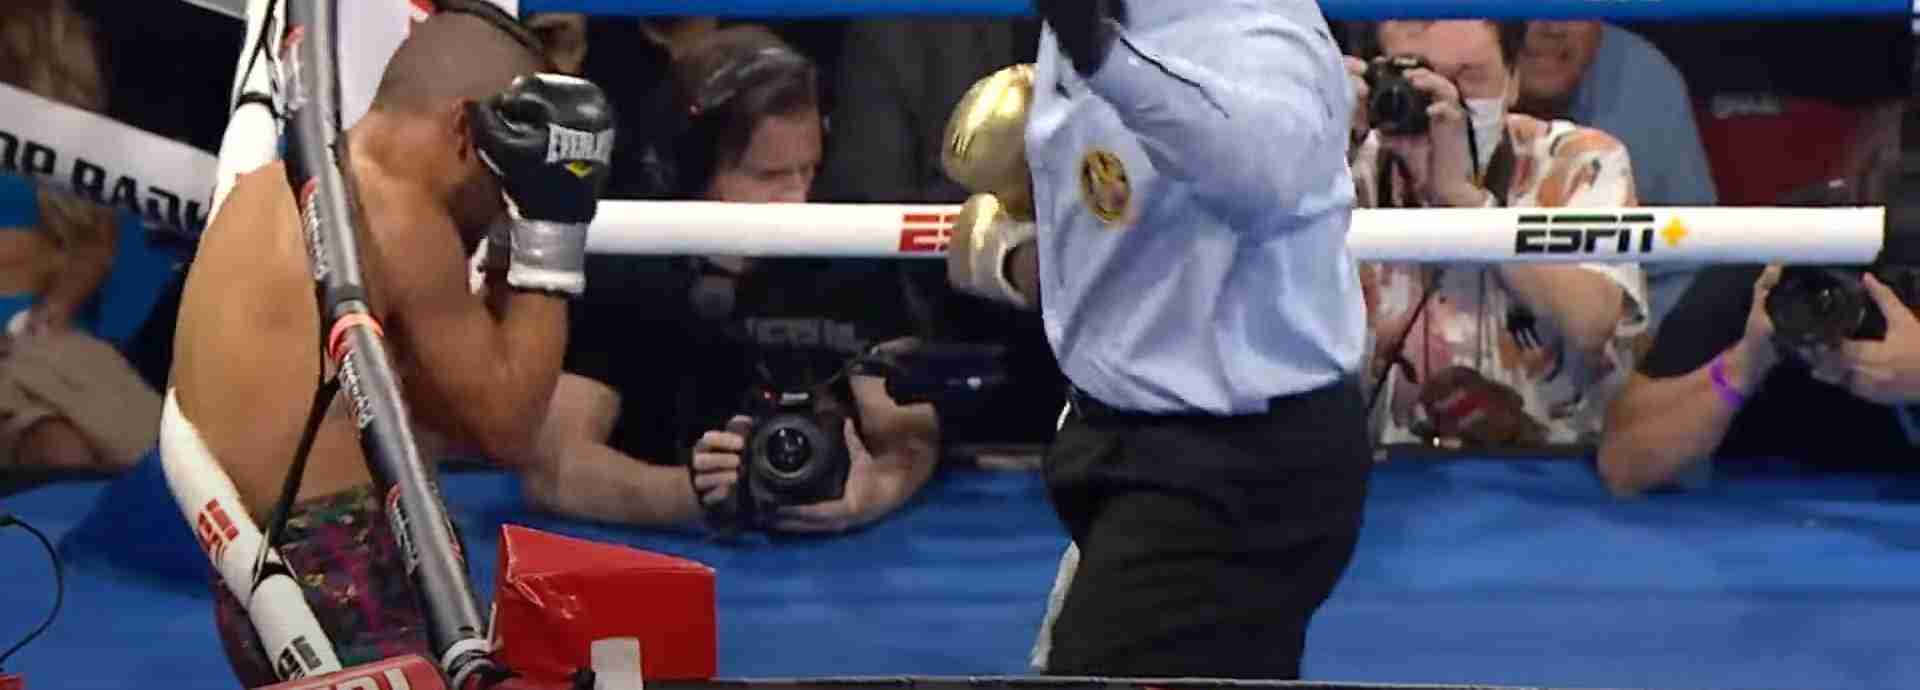 US Olympic Star Violently Knocks Out Opponent